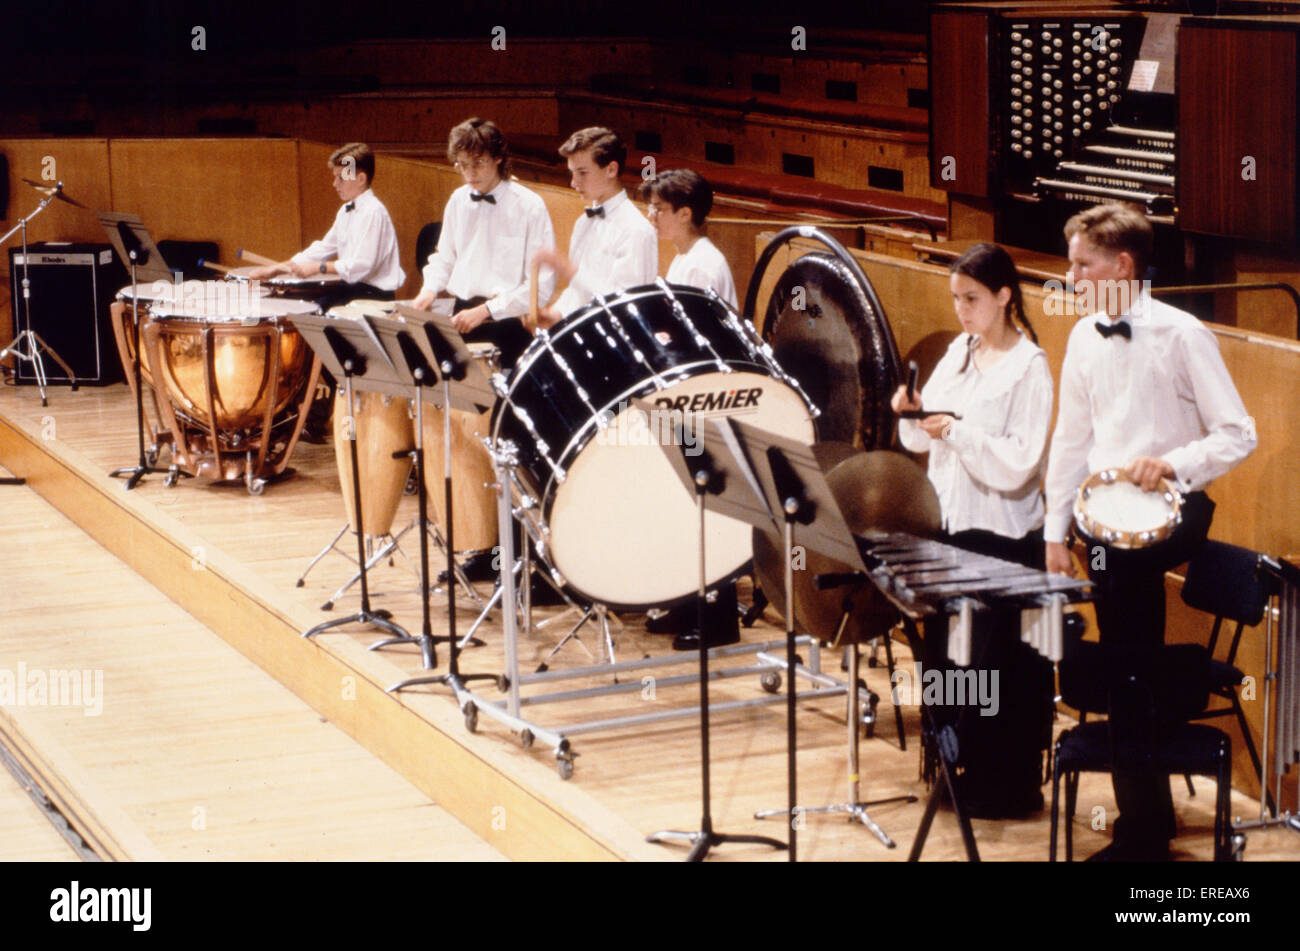 PERCUSSION SECTION. Children, teenagers, young adults, playing in percussion section of orchestra. Stock Photo